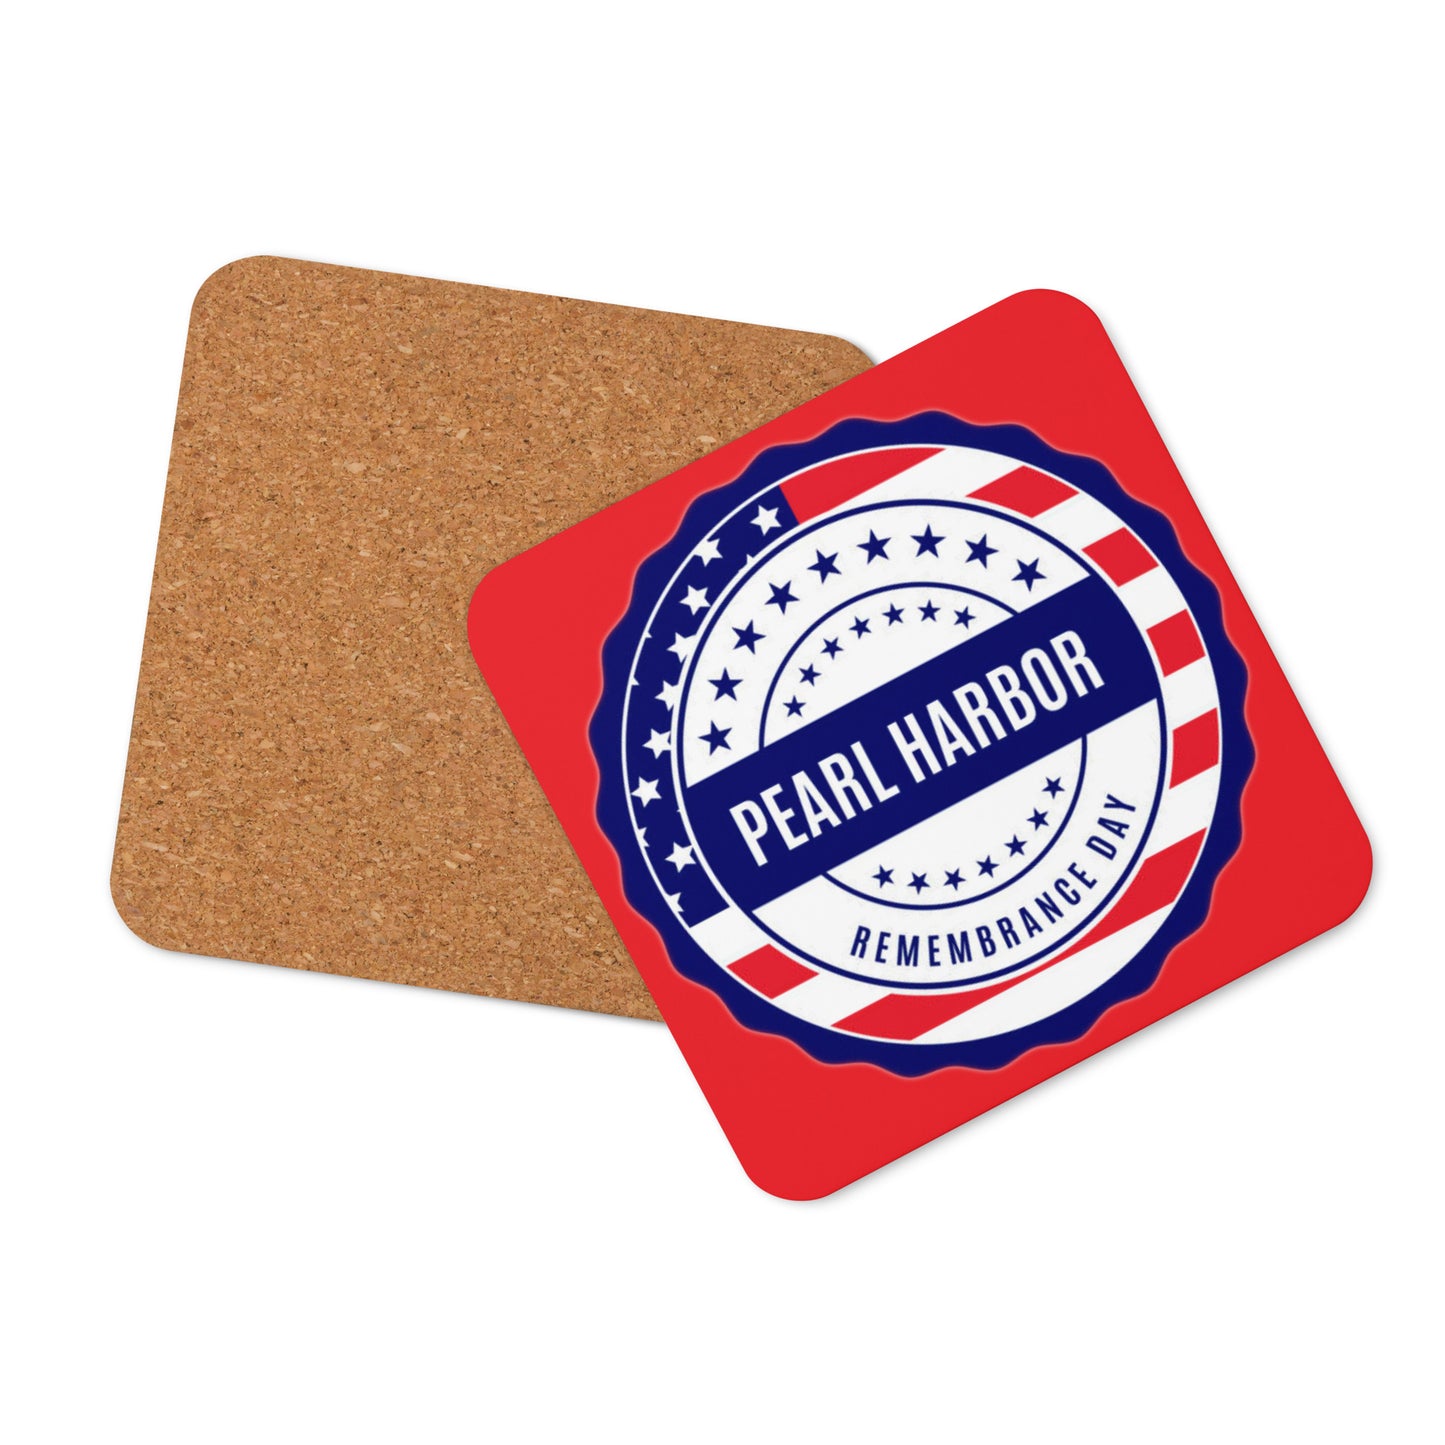 Cork-back coaster - Pearl Harbor Remembrance Day (Red)